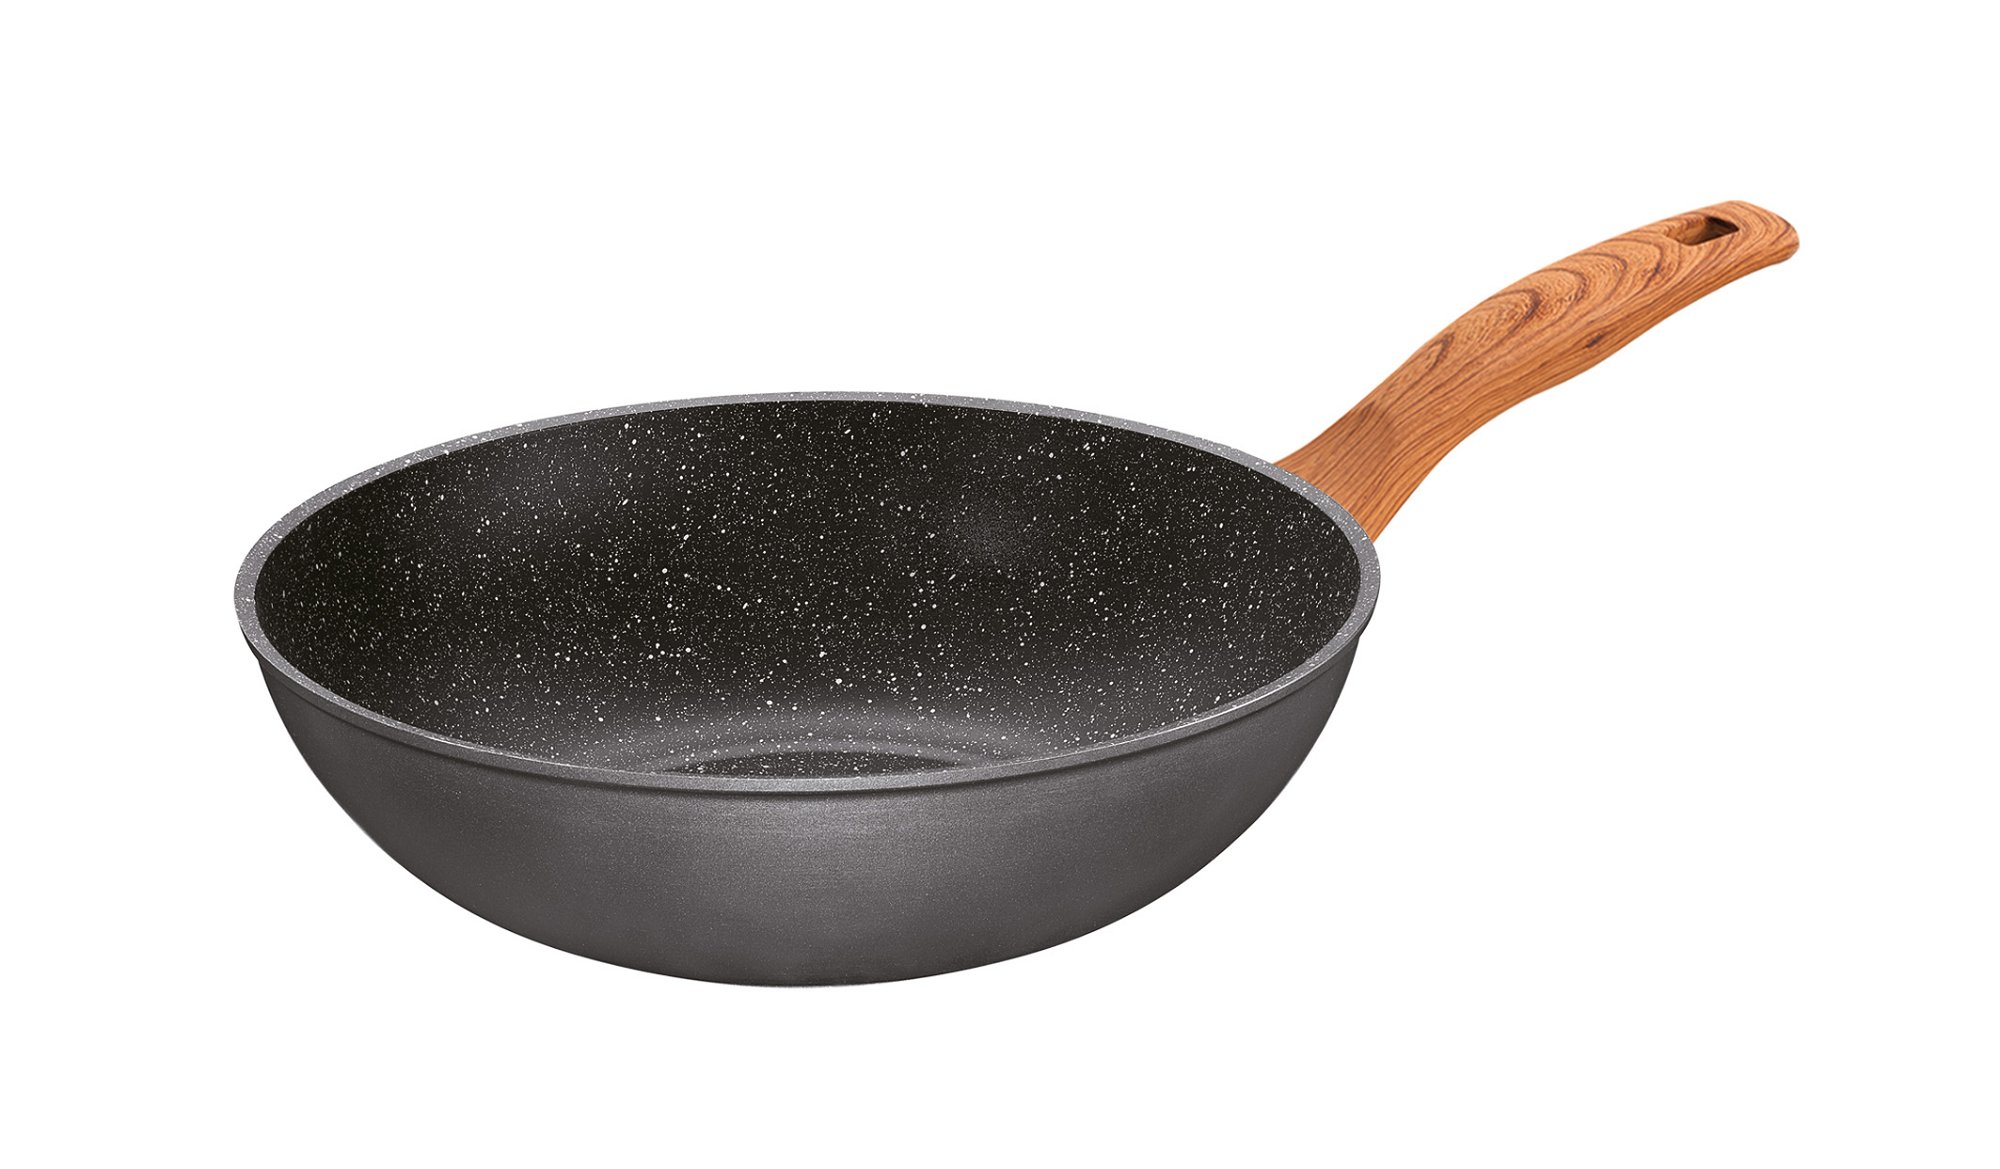 STONELINE® Wok Pan 30 cm, Non-Stick | Made in Germany | Wood Design, Back to Nature